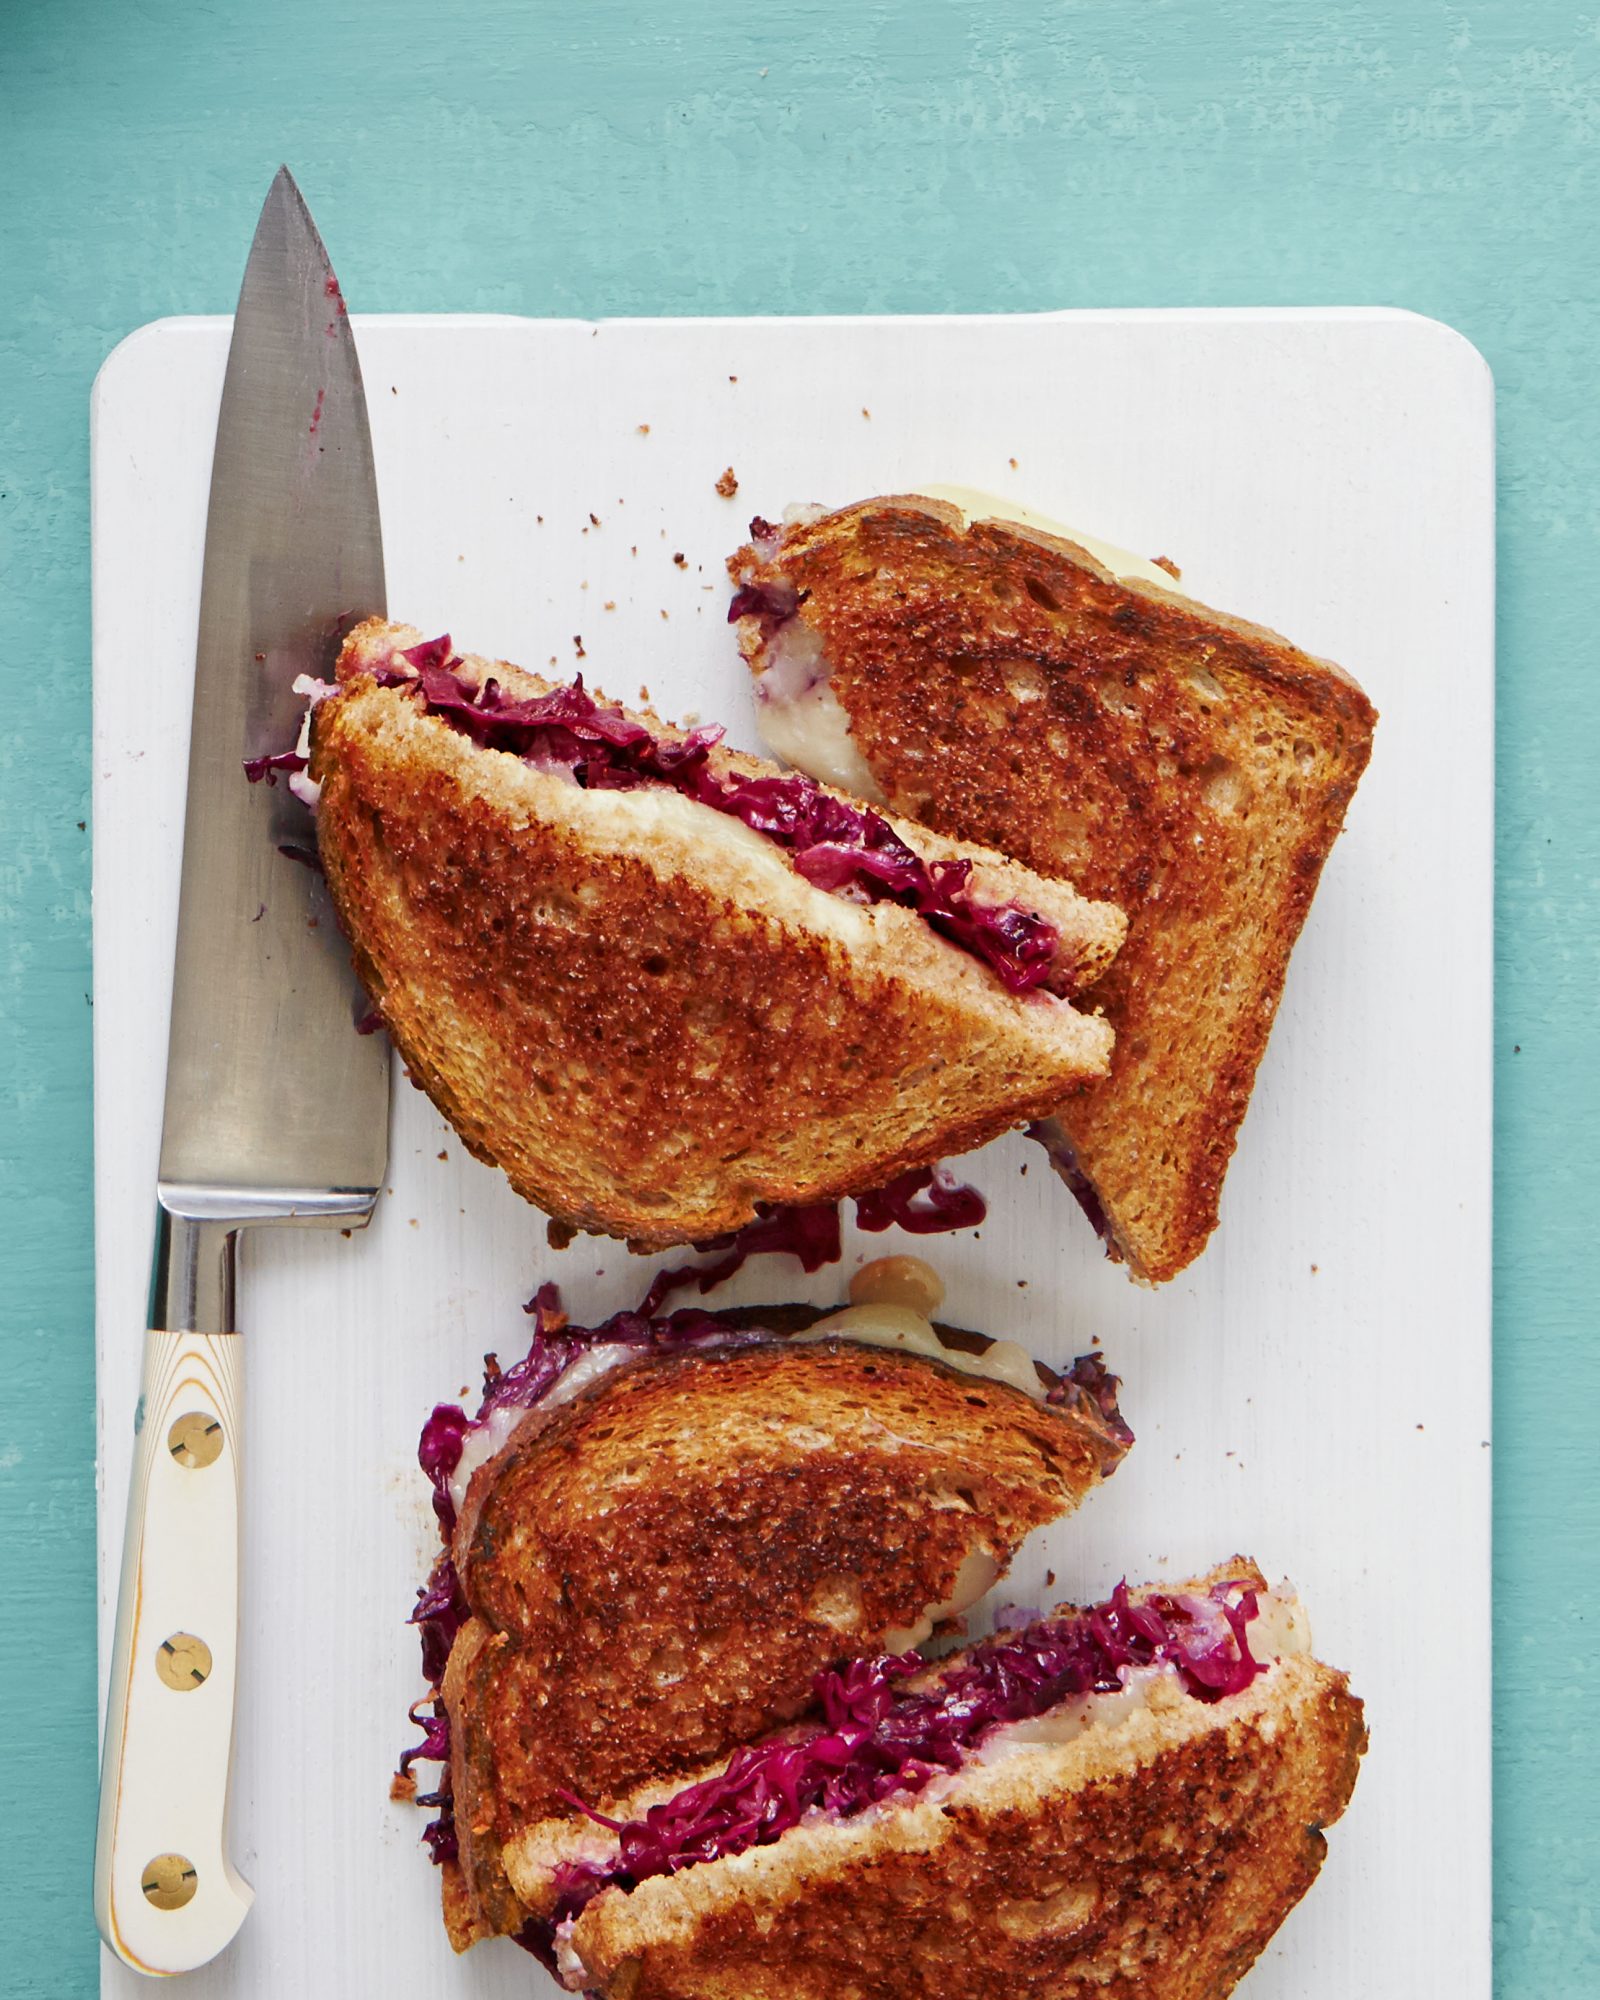 Grilled Cheese & Red Cabbage Sandwiches